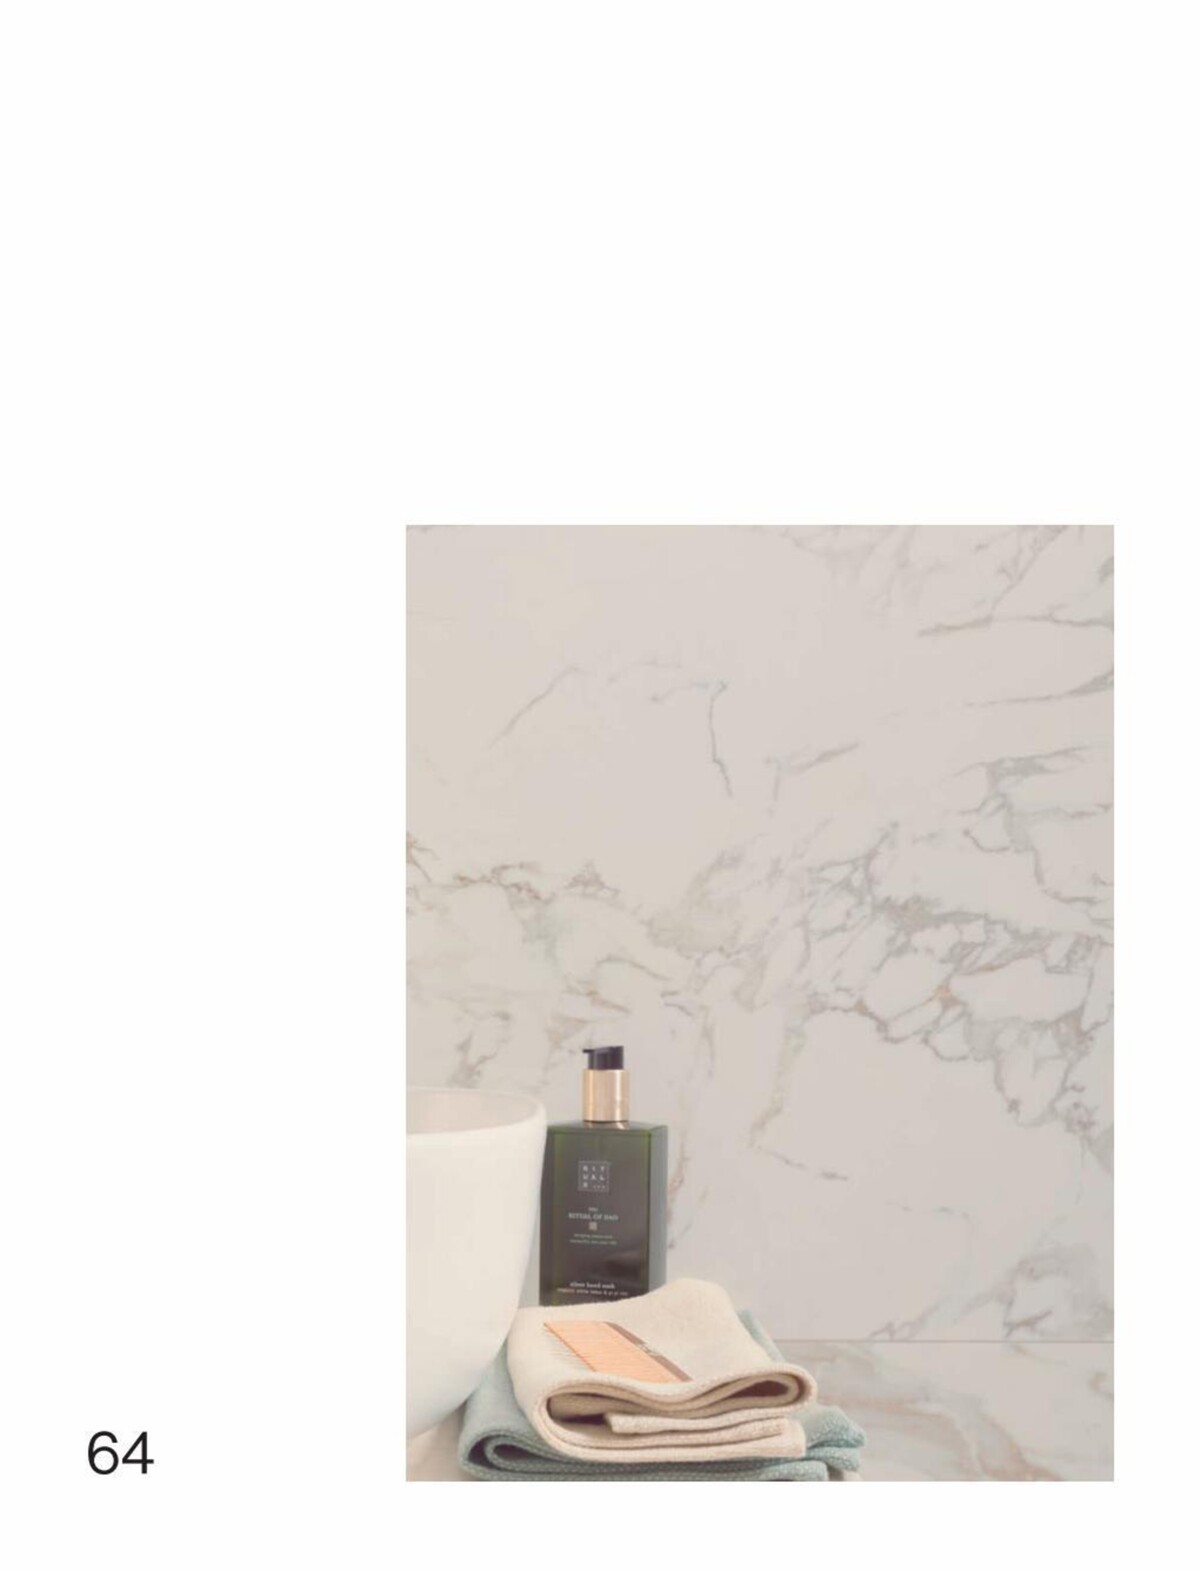 Catalogue MARMI,a ceramic tile that echoes the purity of marble, page 00064